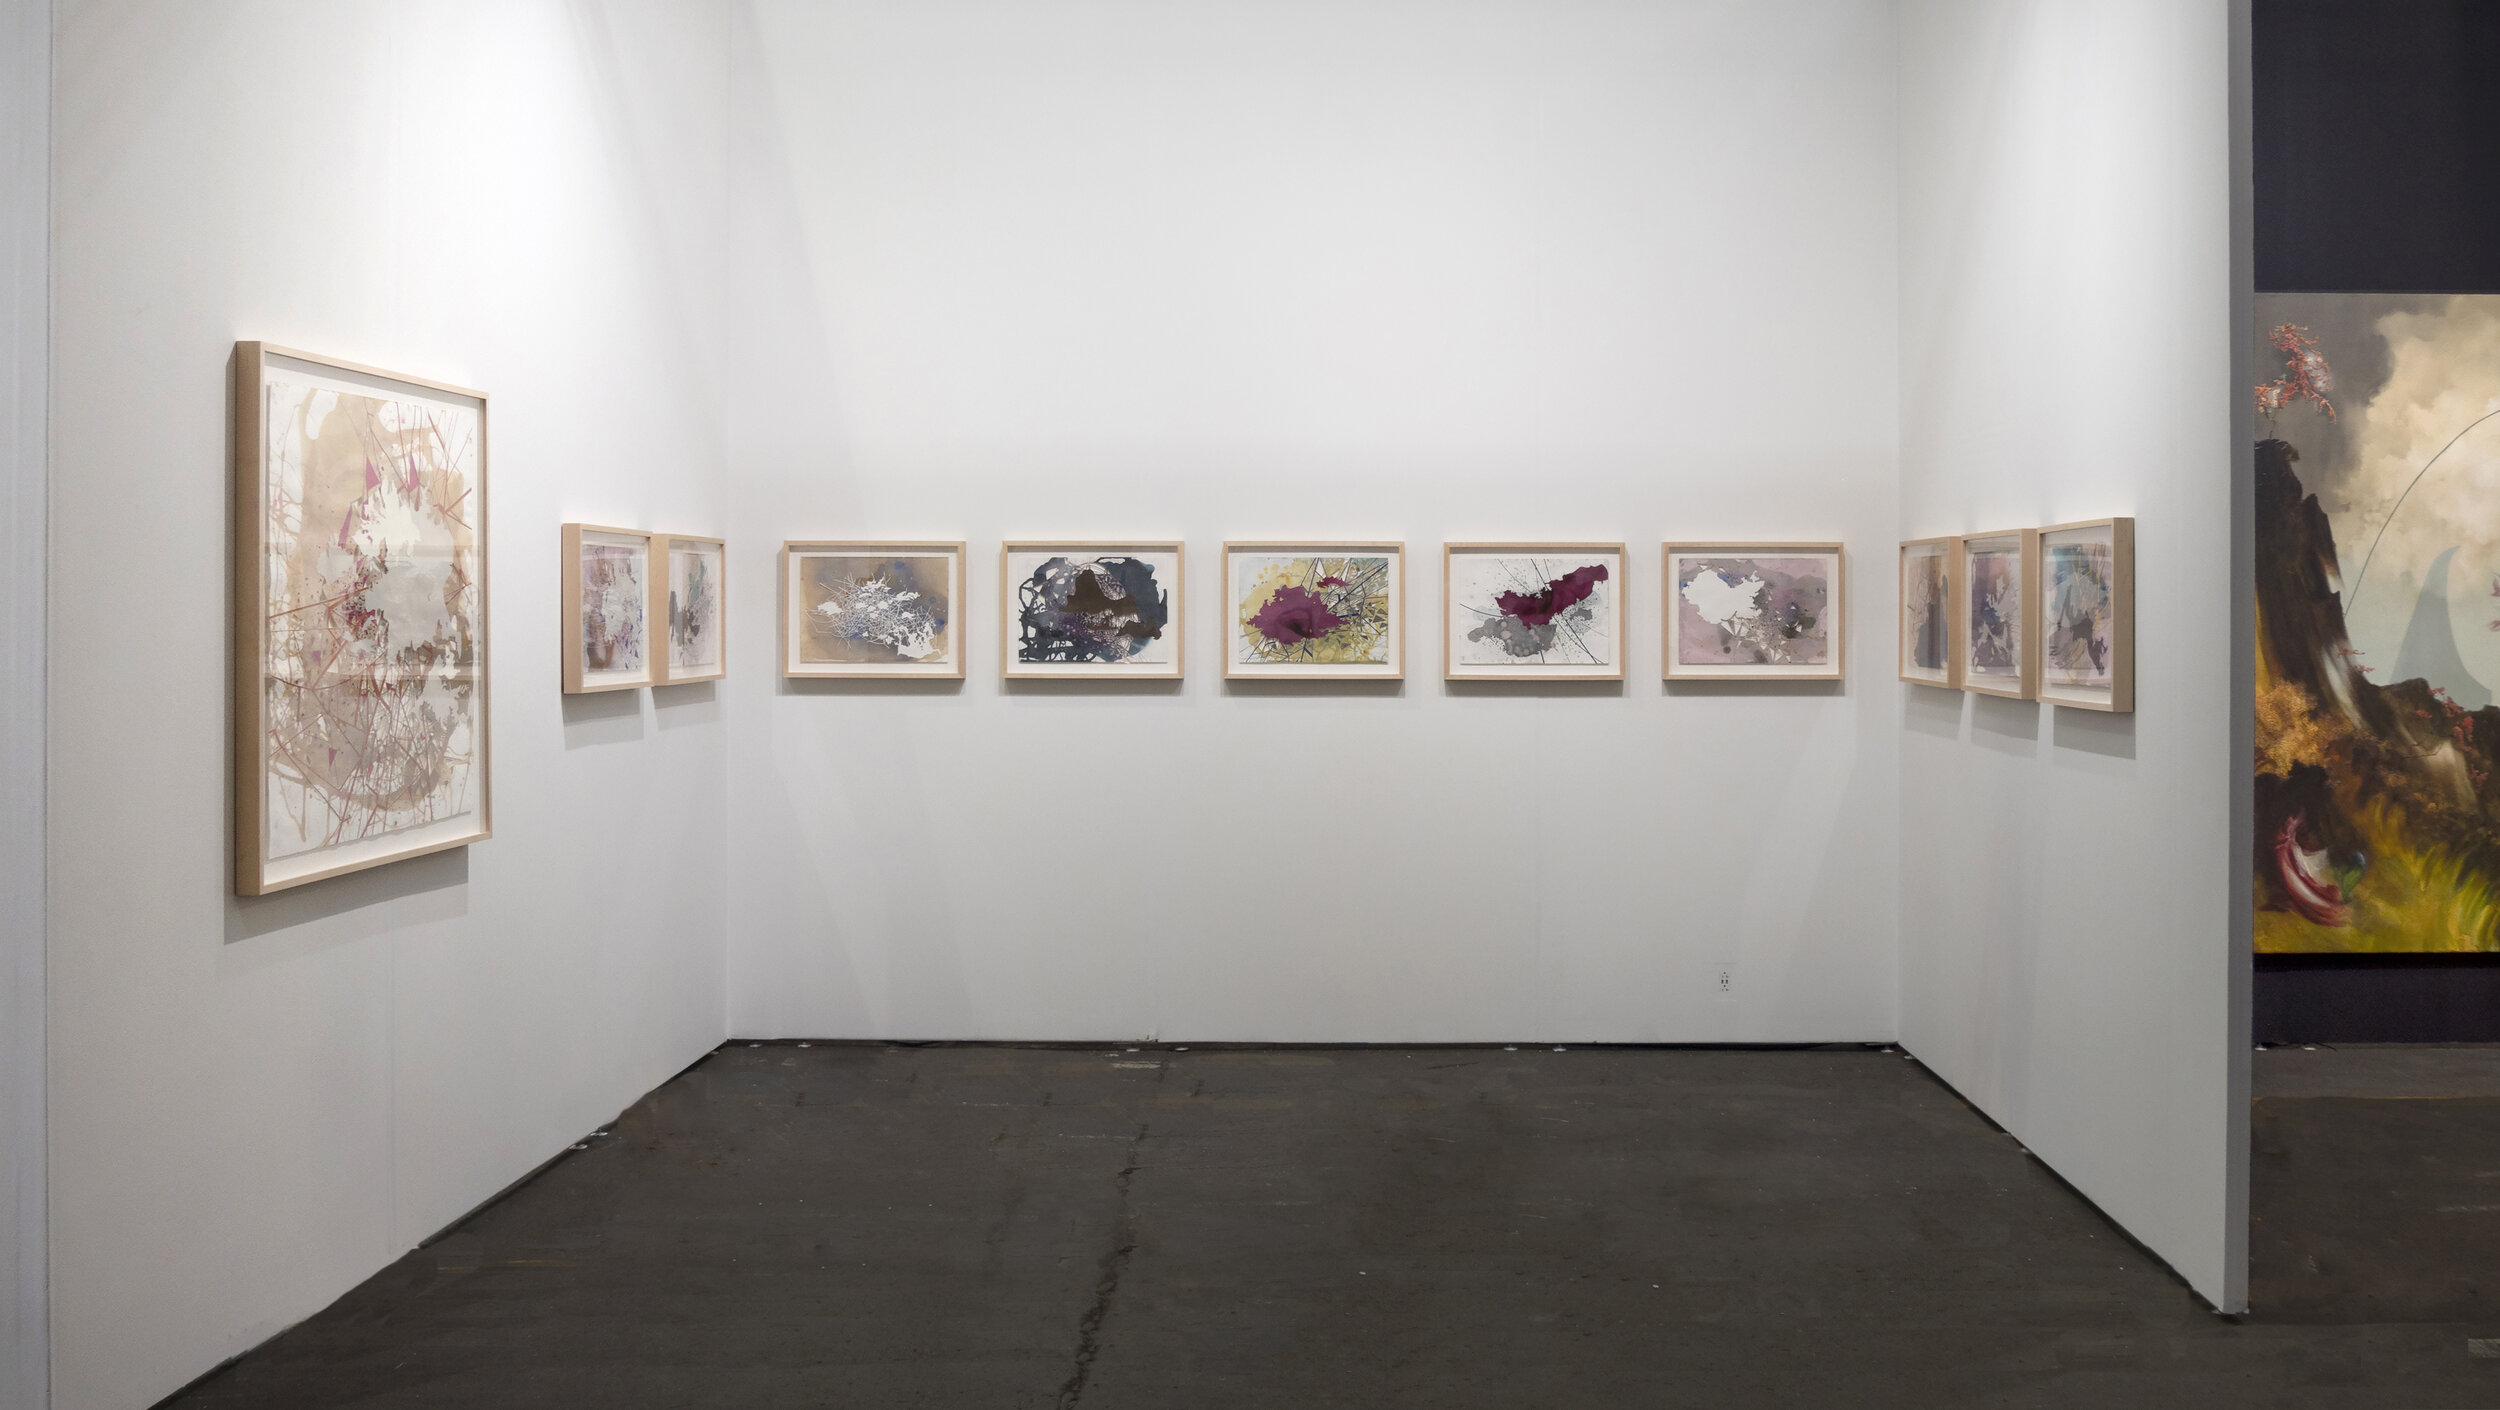  Image: UNTITLED Art, San Francisco 2020, installation view, Gallery Wendi Norris, Booth A1, Pier 35, 1454 The Embarcadero, San Francisco, CA, January 16 – 19, 2020. Photo: David Stroud. 